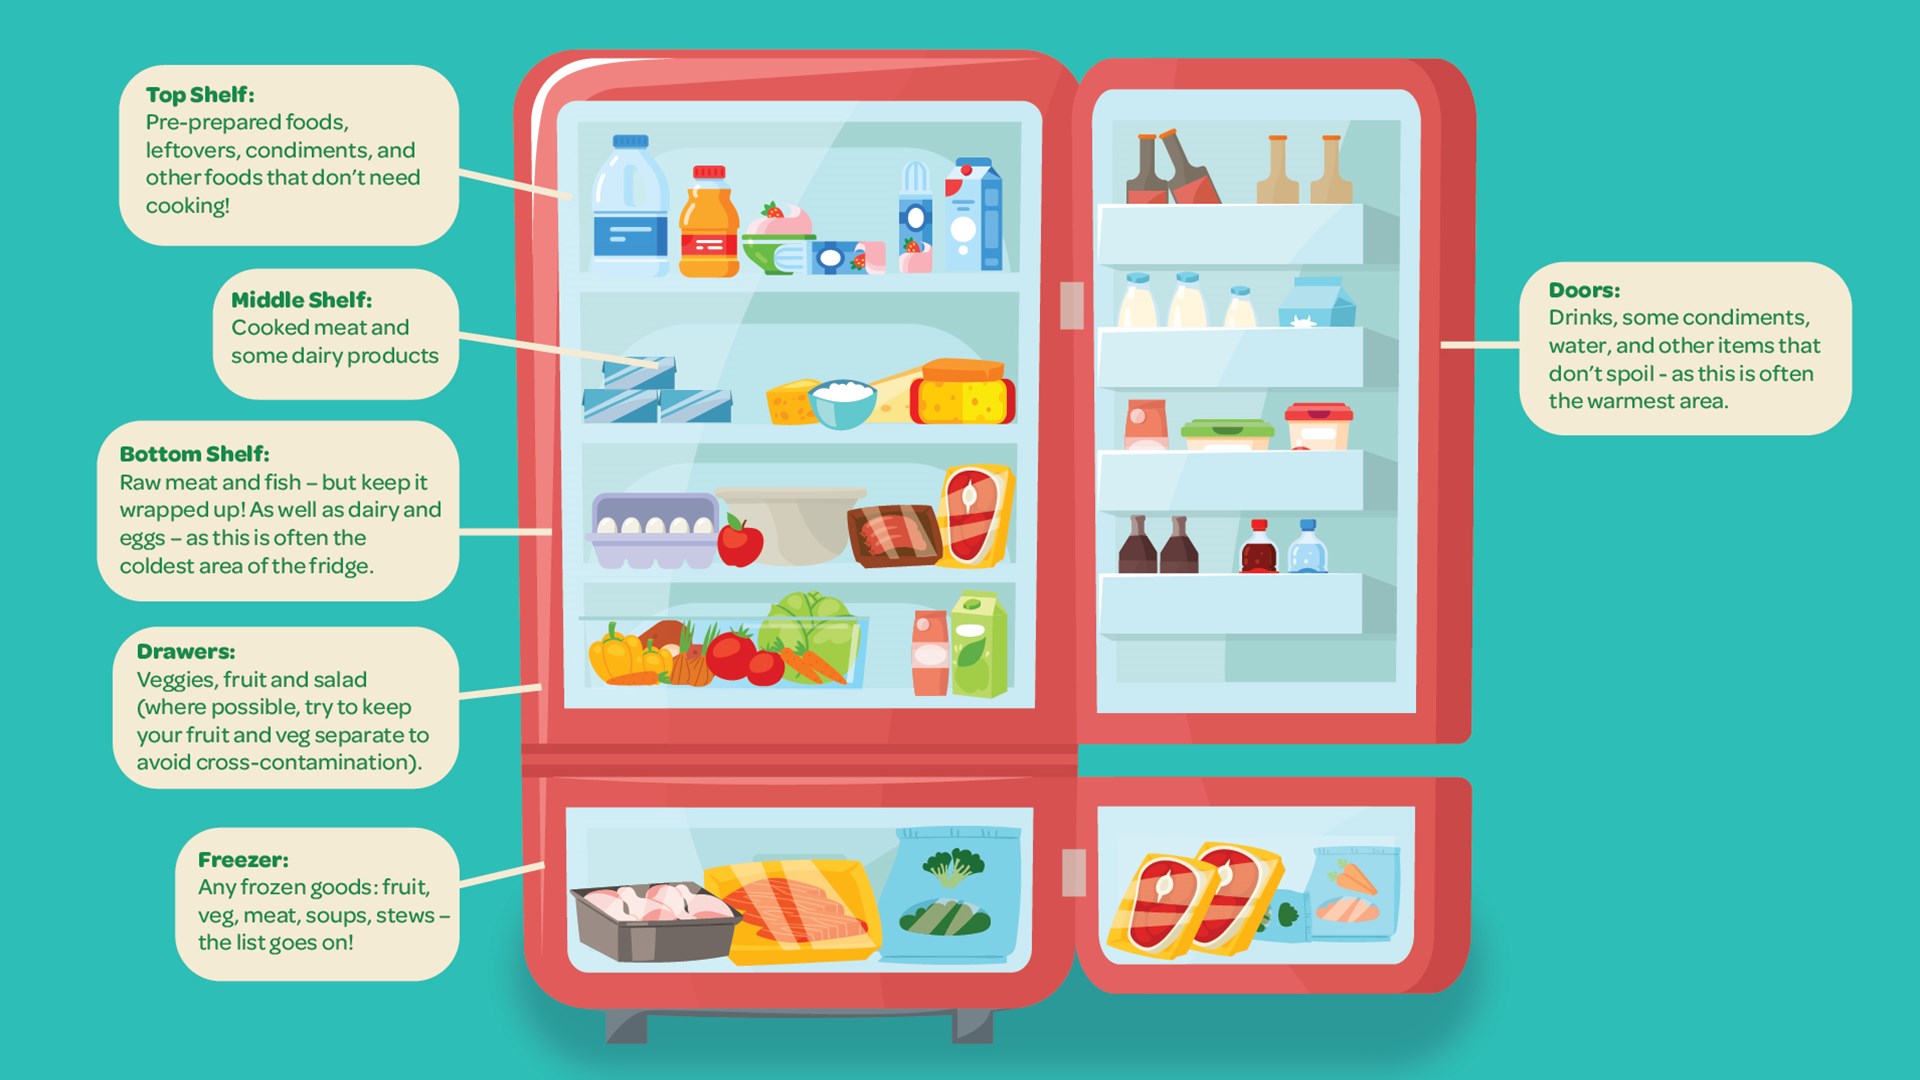 Keeping food safe in your fridge